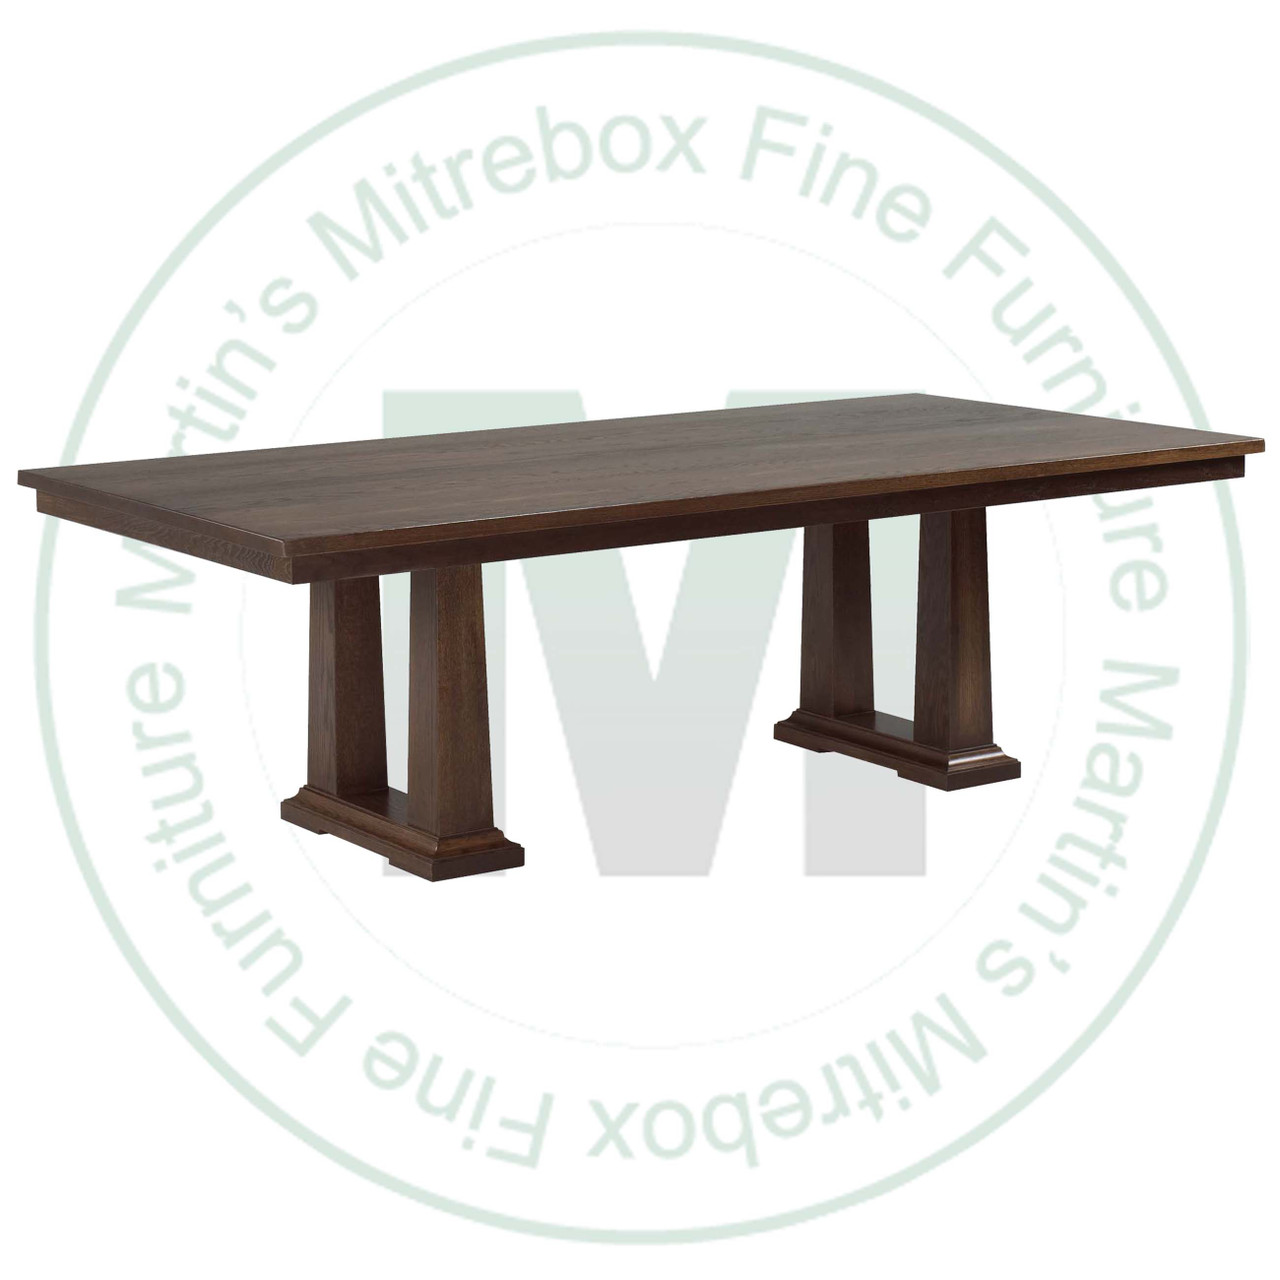 Oak Acropolis Extension Double Pedestal Table 48''D x 84''W x 30''H With 2 - 12'' Leaves Table Has 1.25'' Thick Top